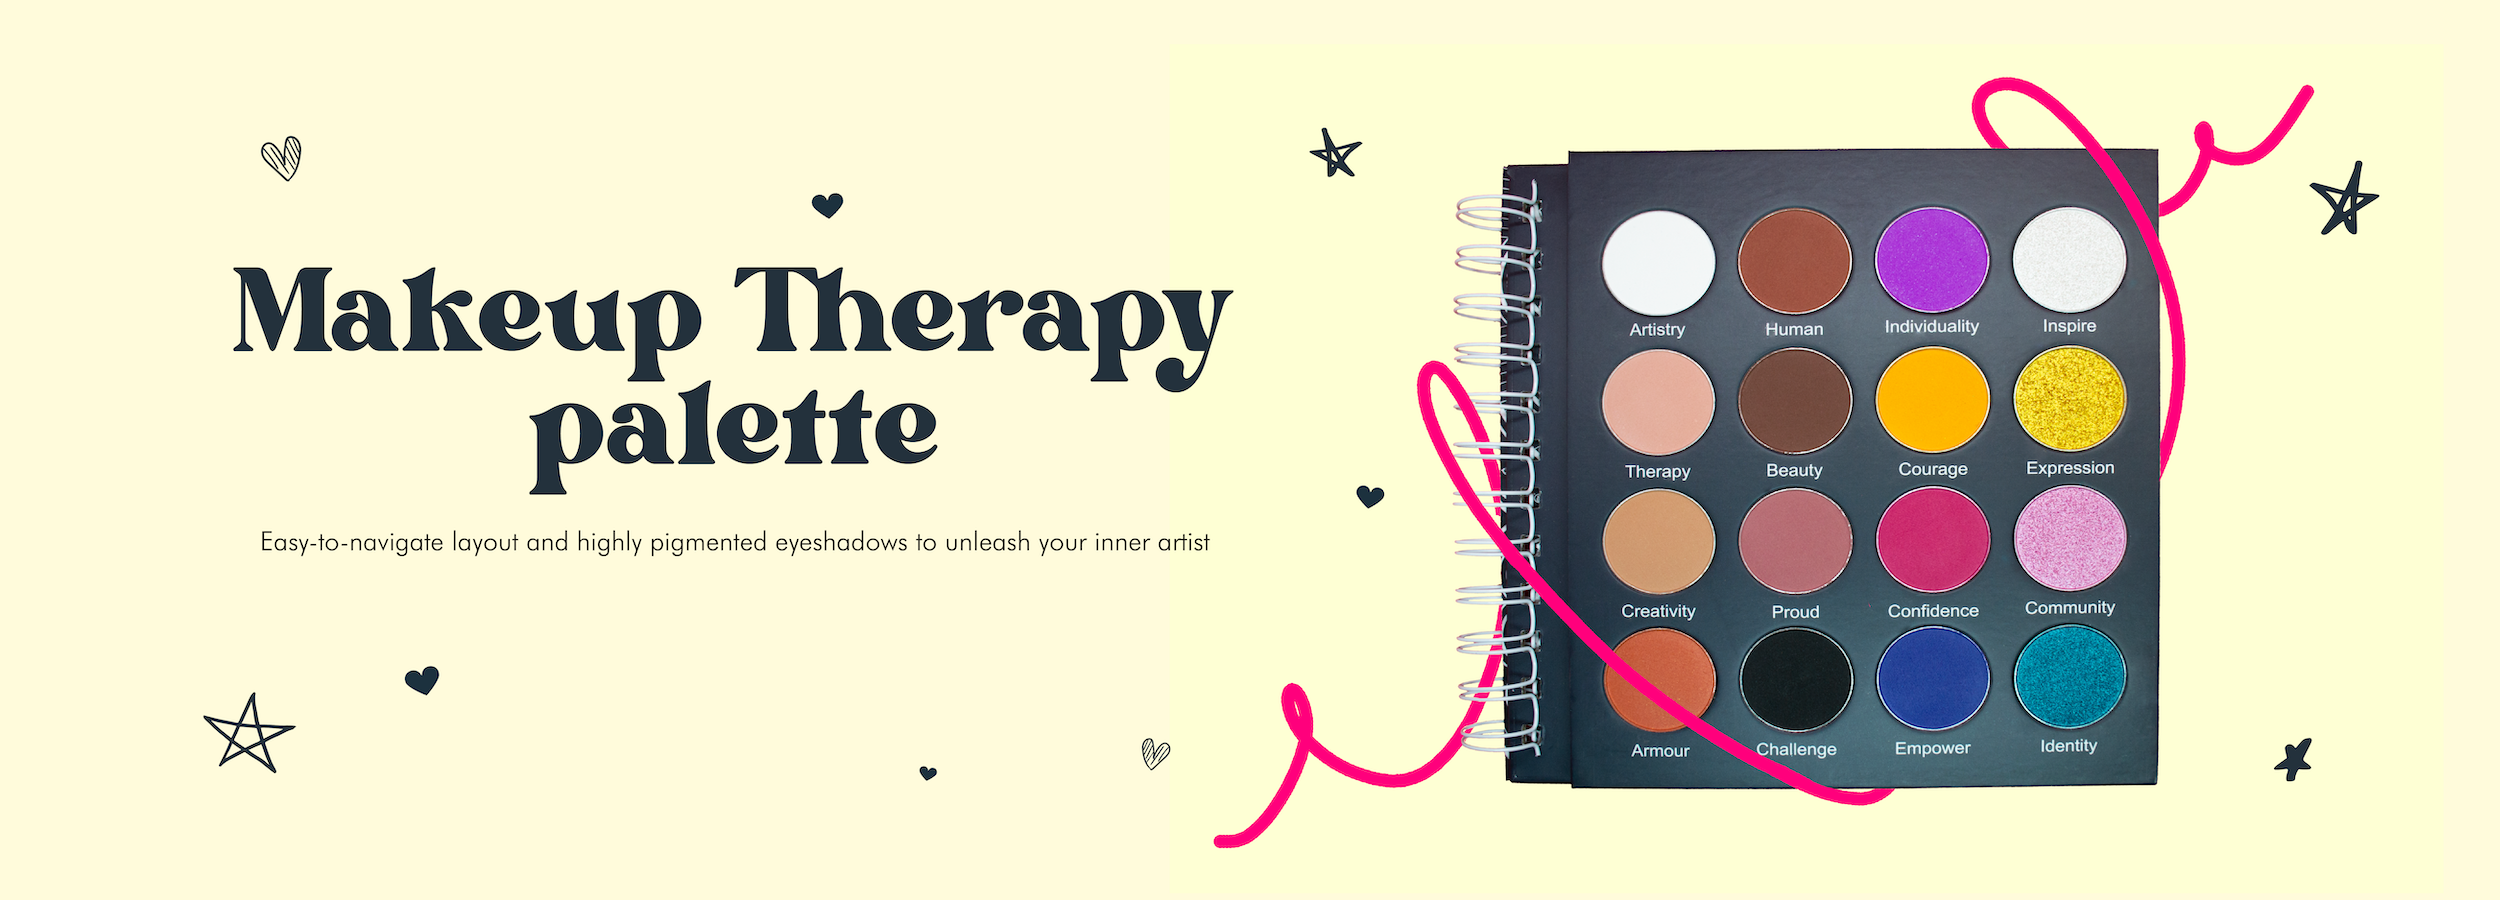 Large visual of the Makeup Therapy palette open on a light yellow background. A text reads "Makeup Therapy Palette. Easy-to-navigate layout and highly pigmented eyeshadows to unleash your inner artist."